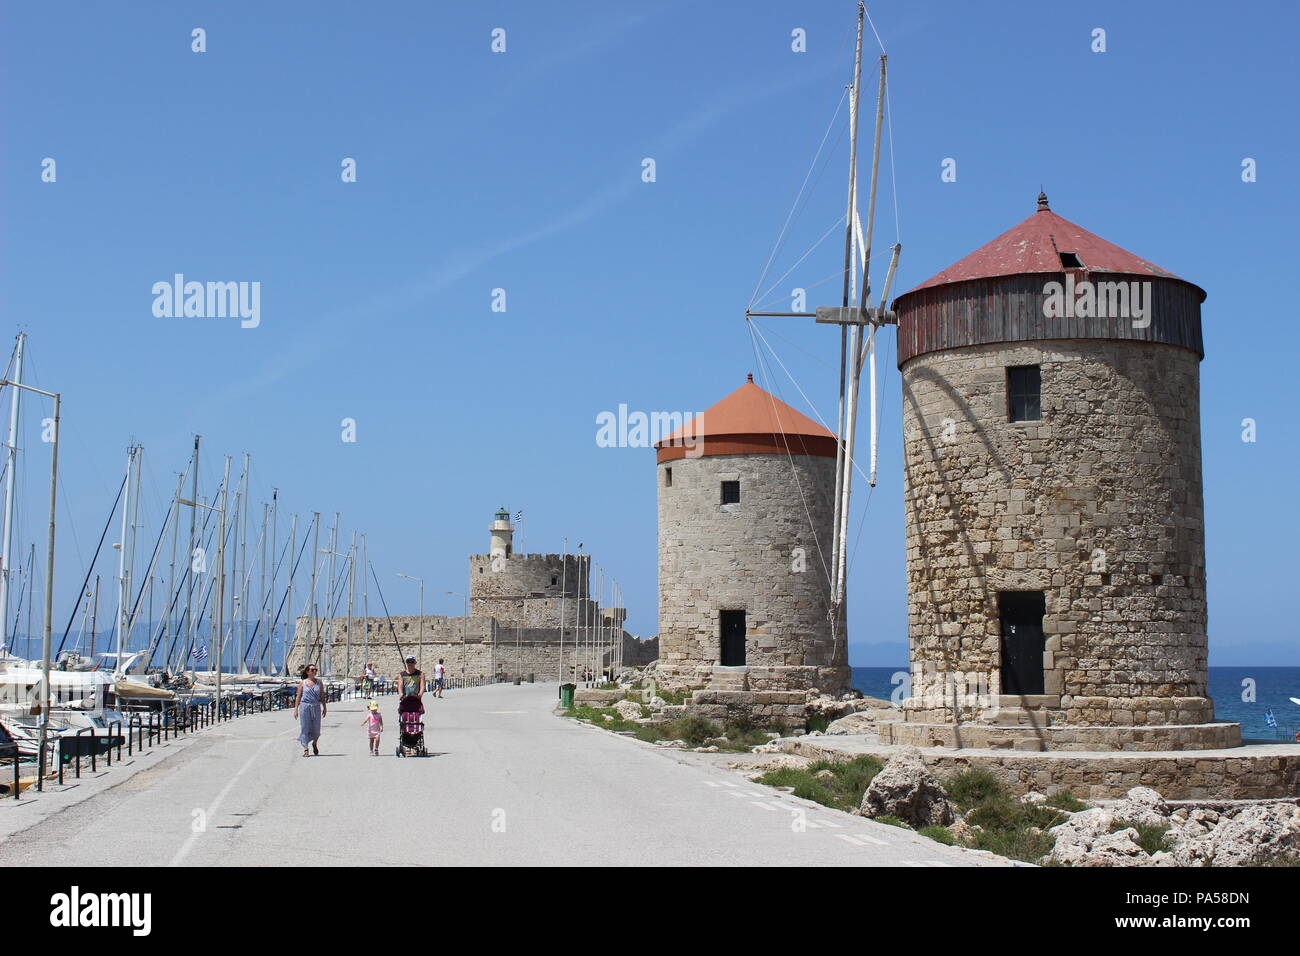 Old windmills at the center of the Rhodes, Faliraki. A tourist family enjoys beautiful shinny day by sightseeing along the walking way. Stock Photo